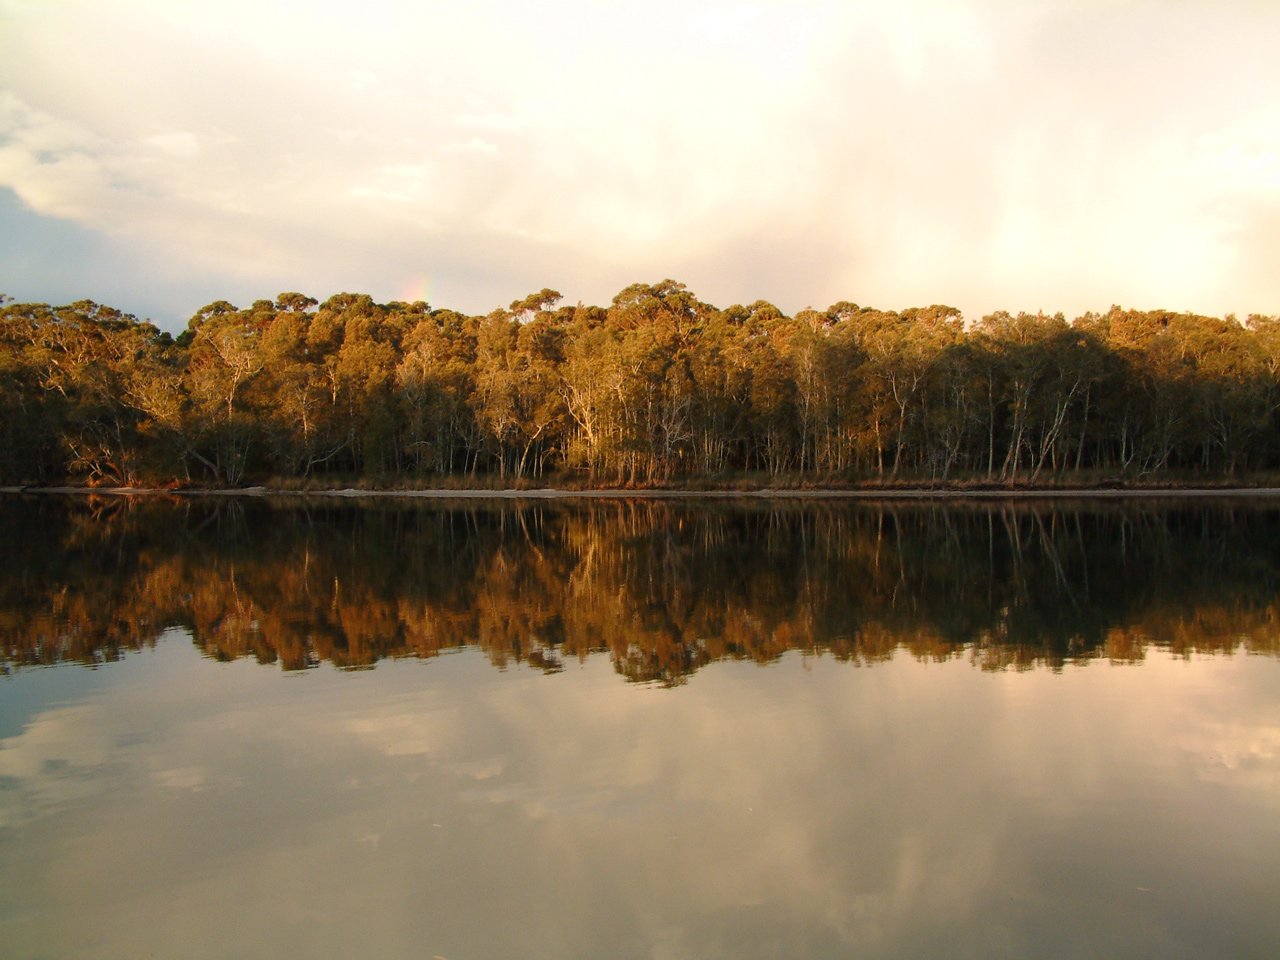 a peaceful tree filled lake with reflections on the water